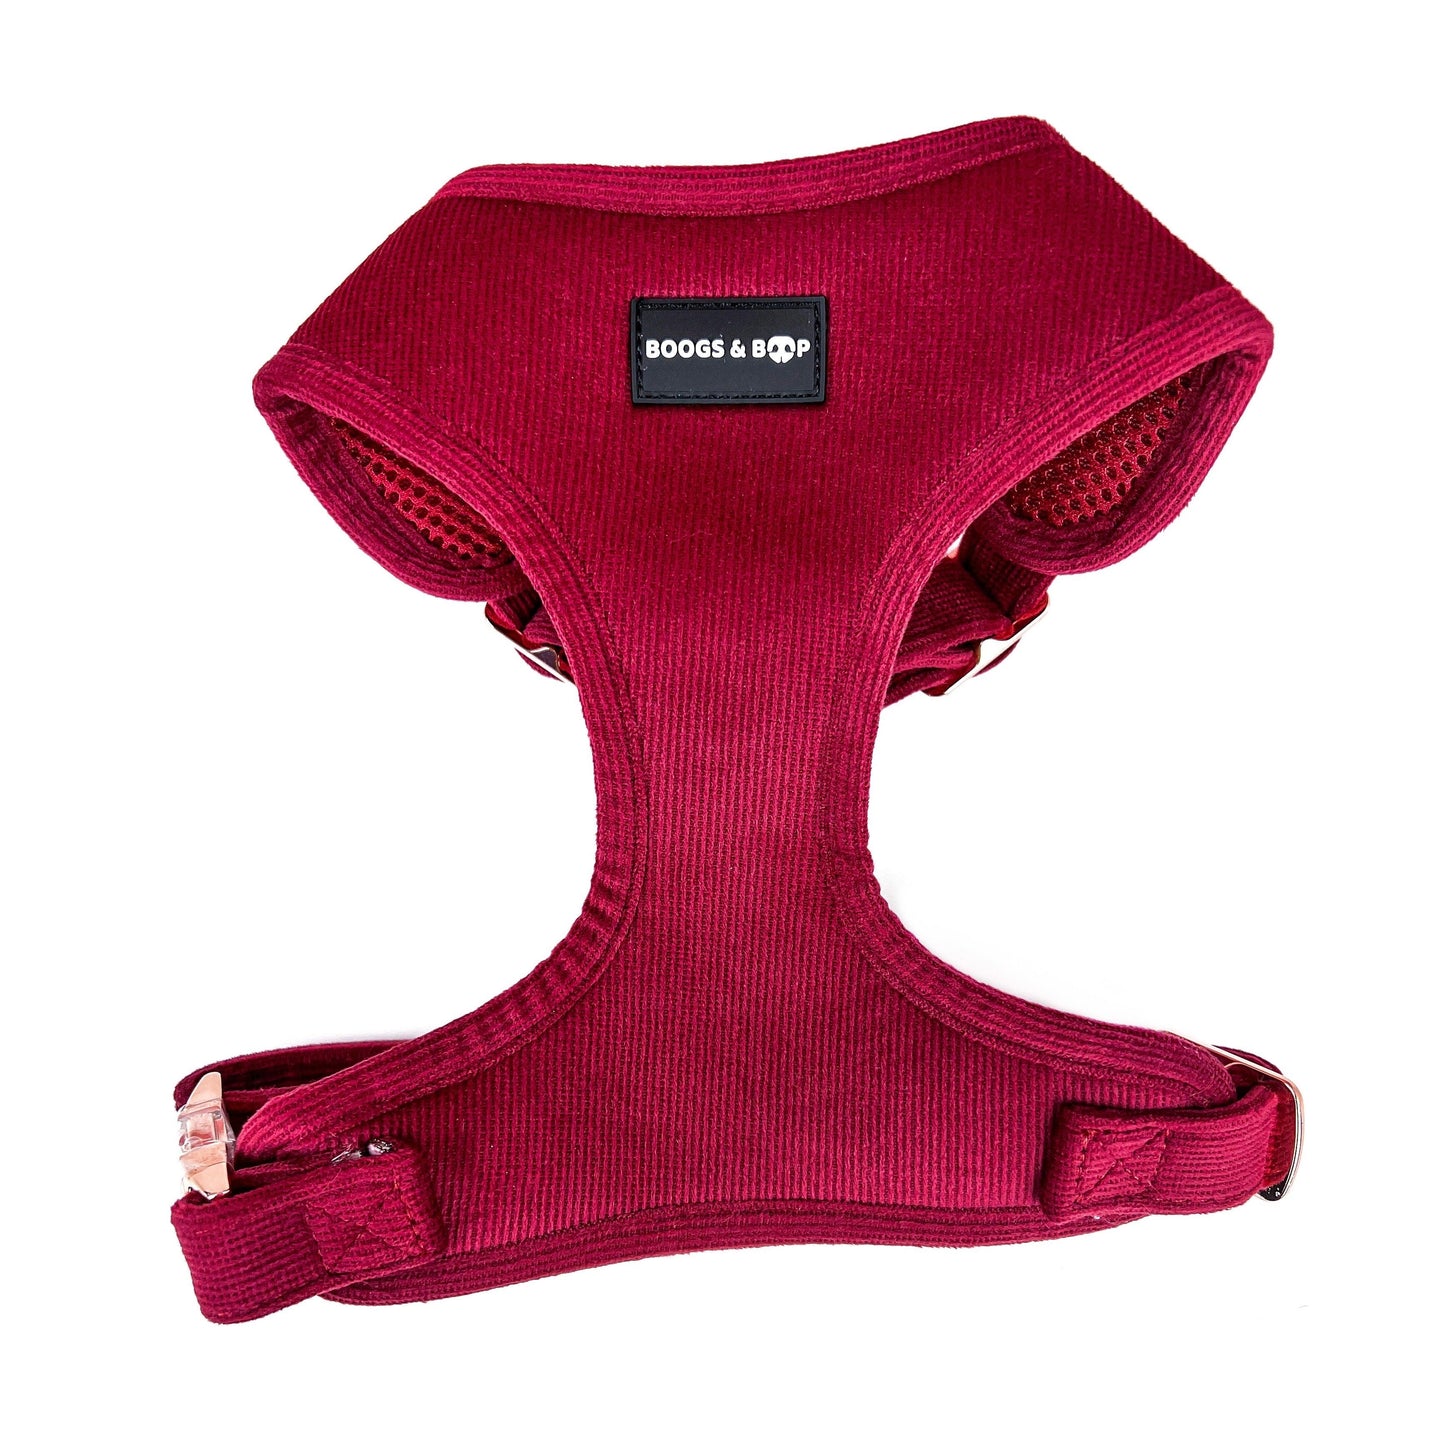 Shop Thick, Durable, and Adjustable Corduroy Dog Harness Berry by Boogs & Boop